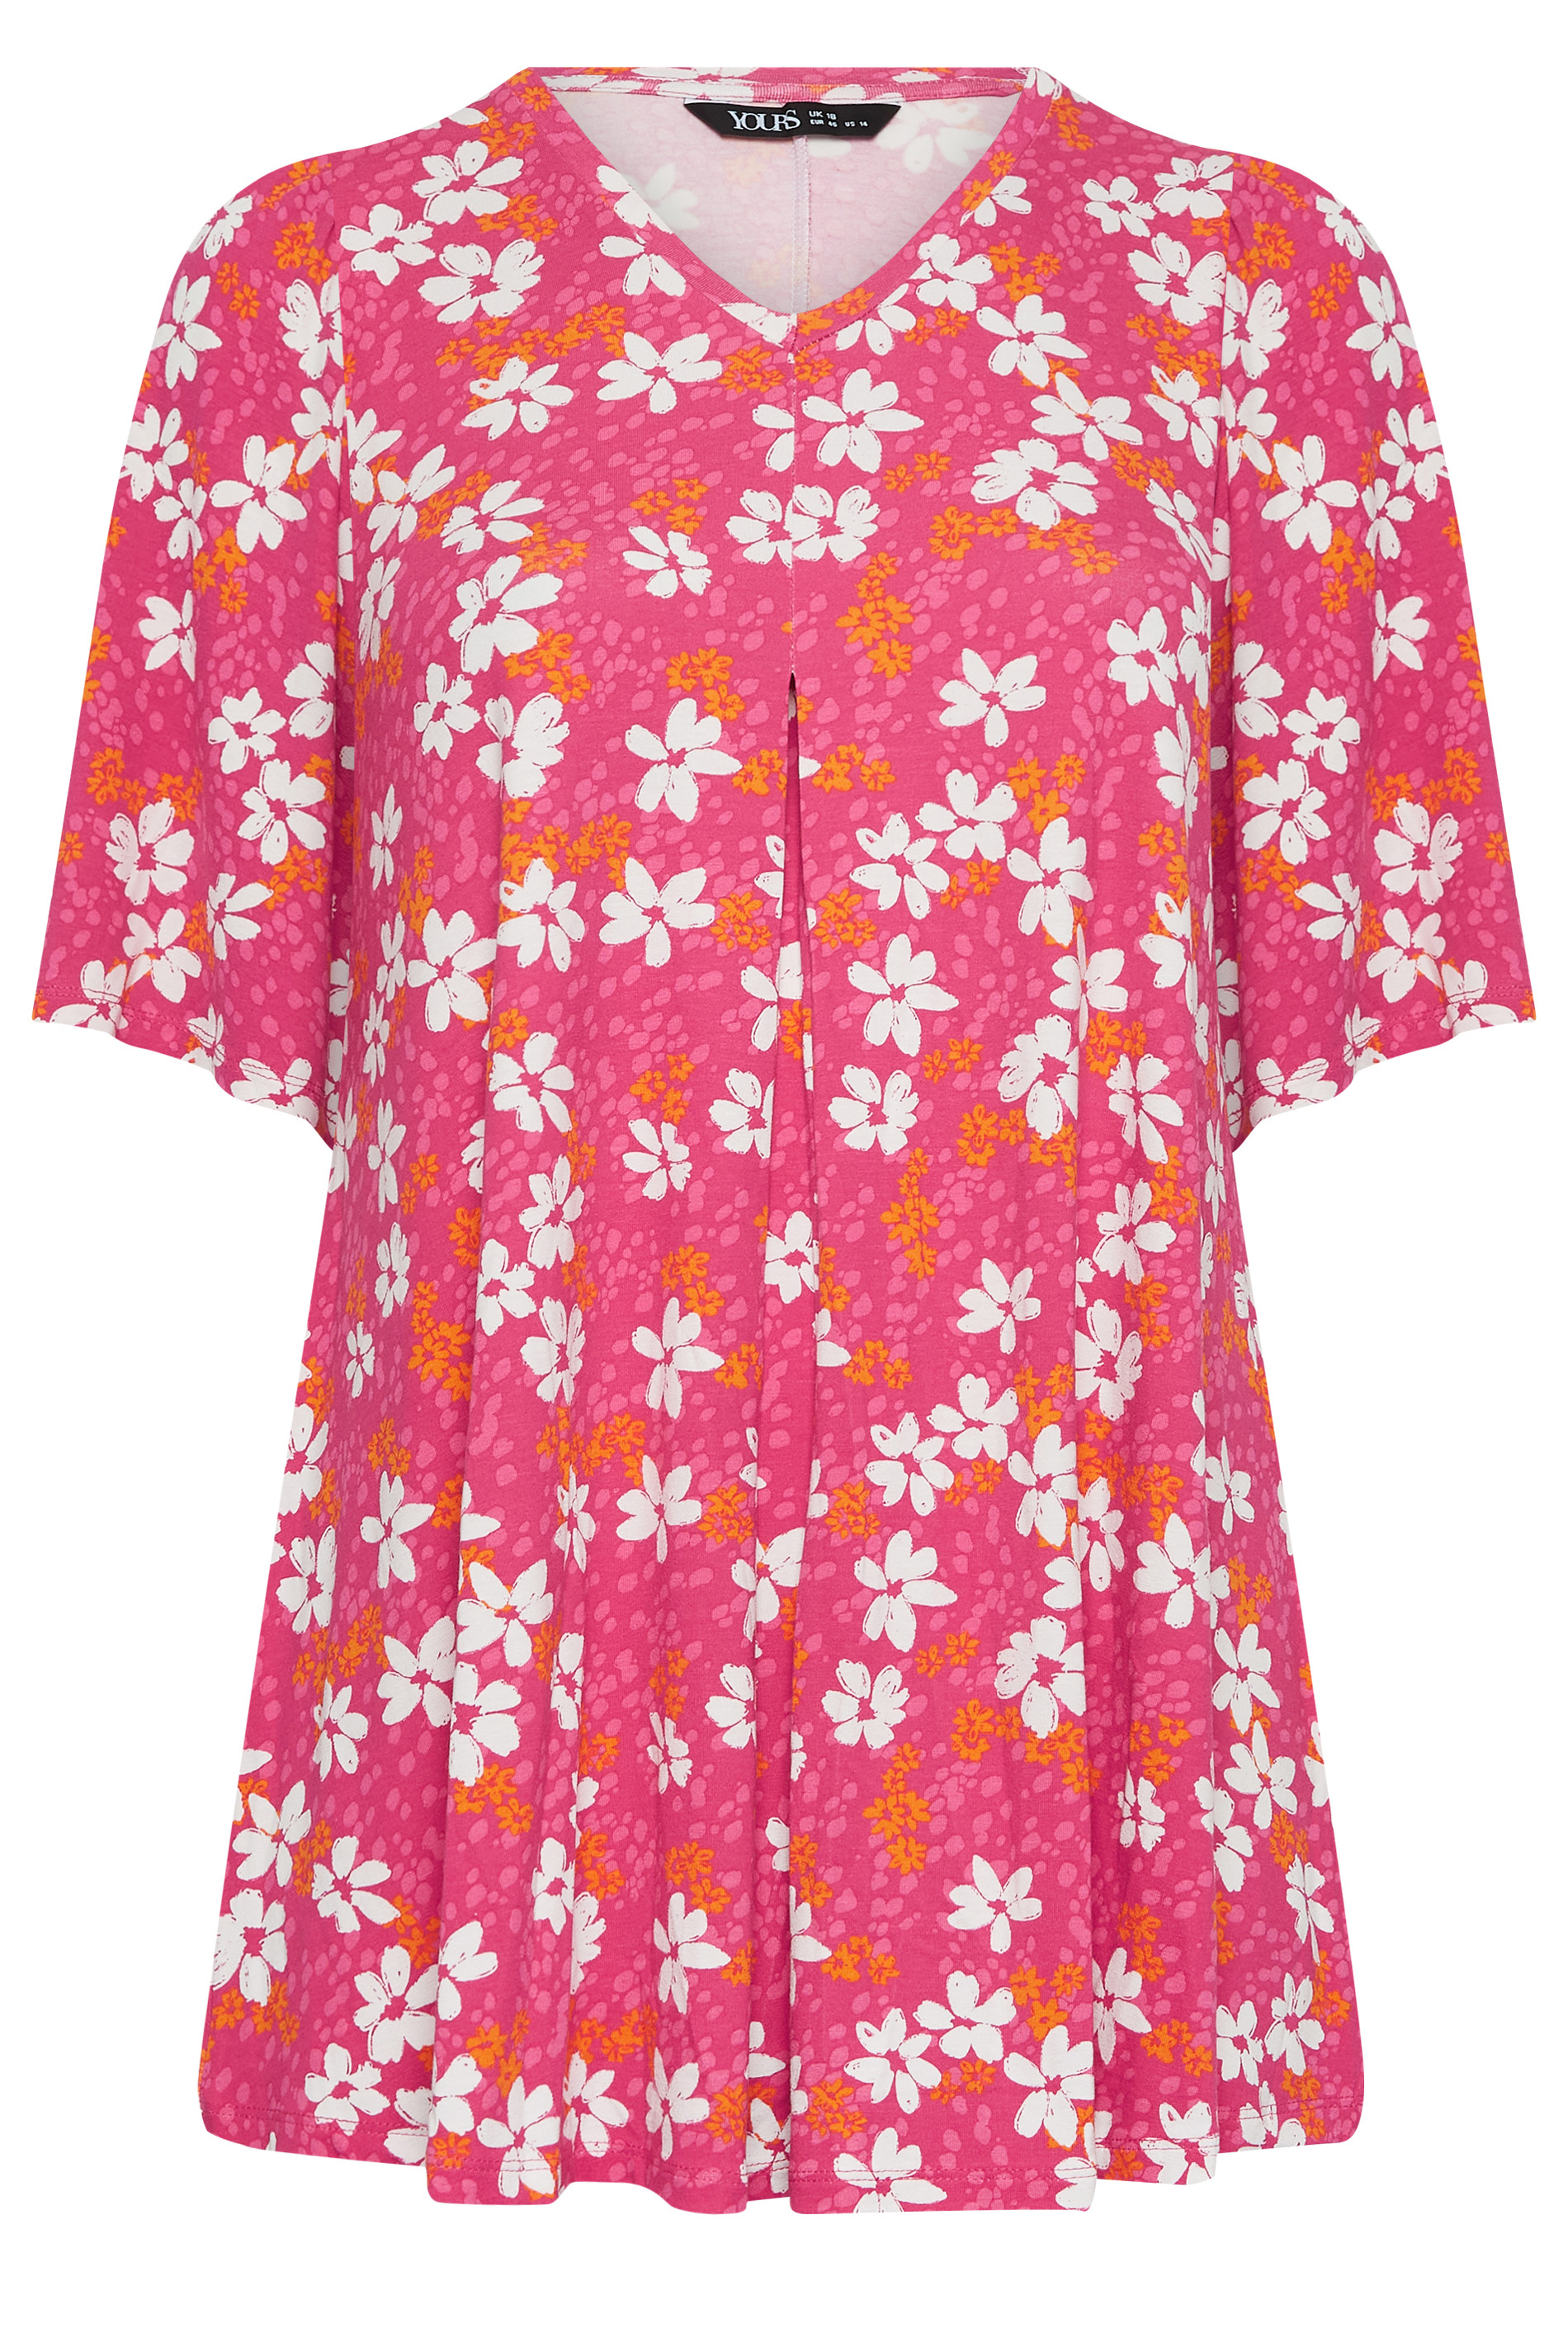 YOURS Curve Plus Size Pink Floral Ditsy Top | Yours Clothing